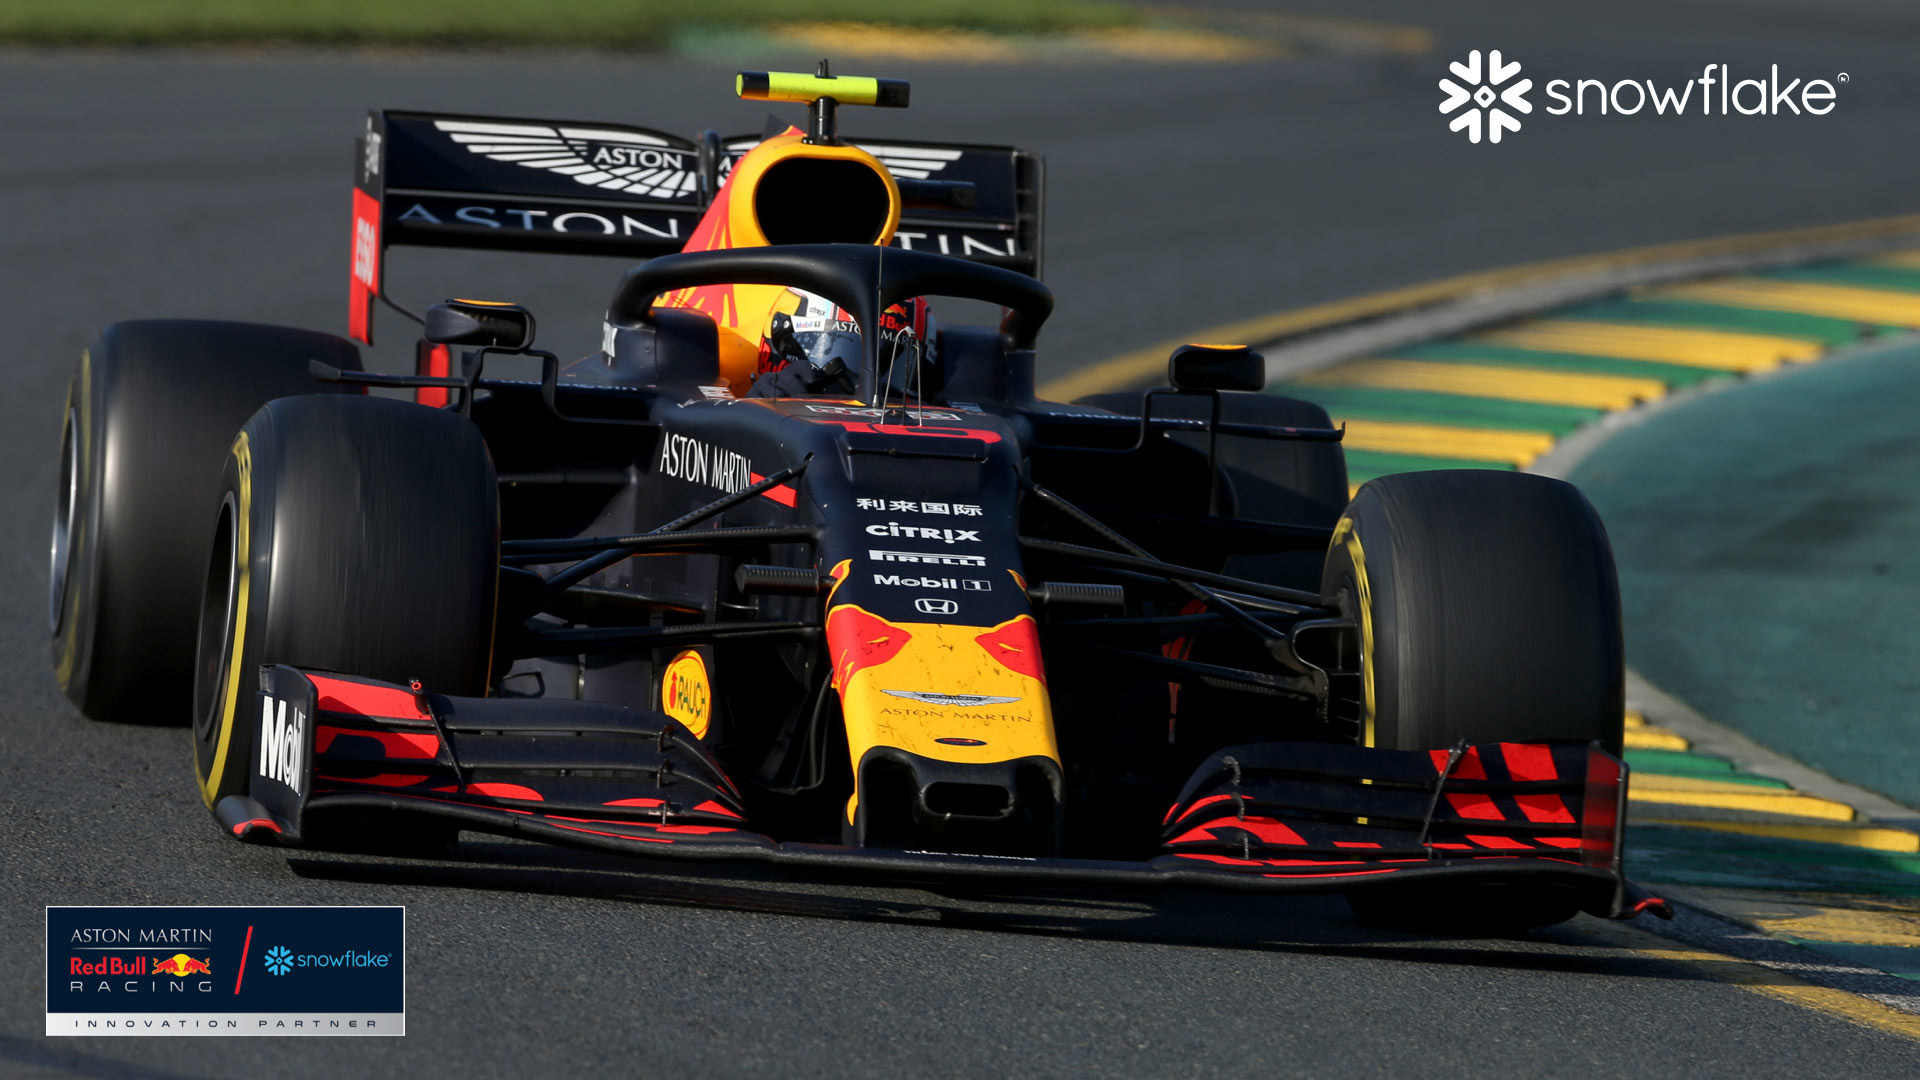 Snowflake And Aston Martin Red Bull Racing Partner To Deliver The Most Data Driven Formula One Season To Date